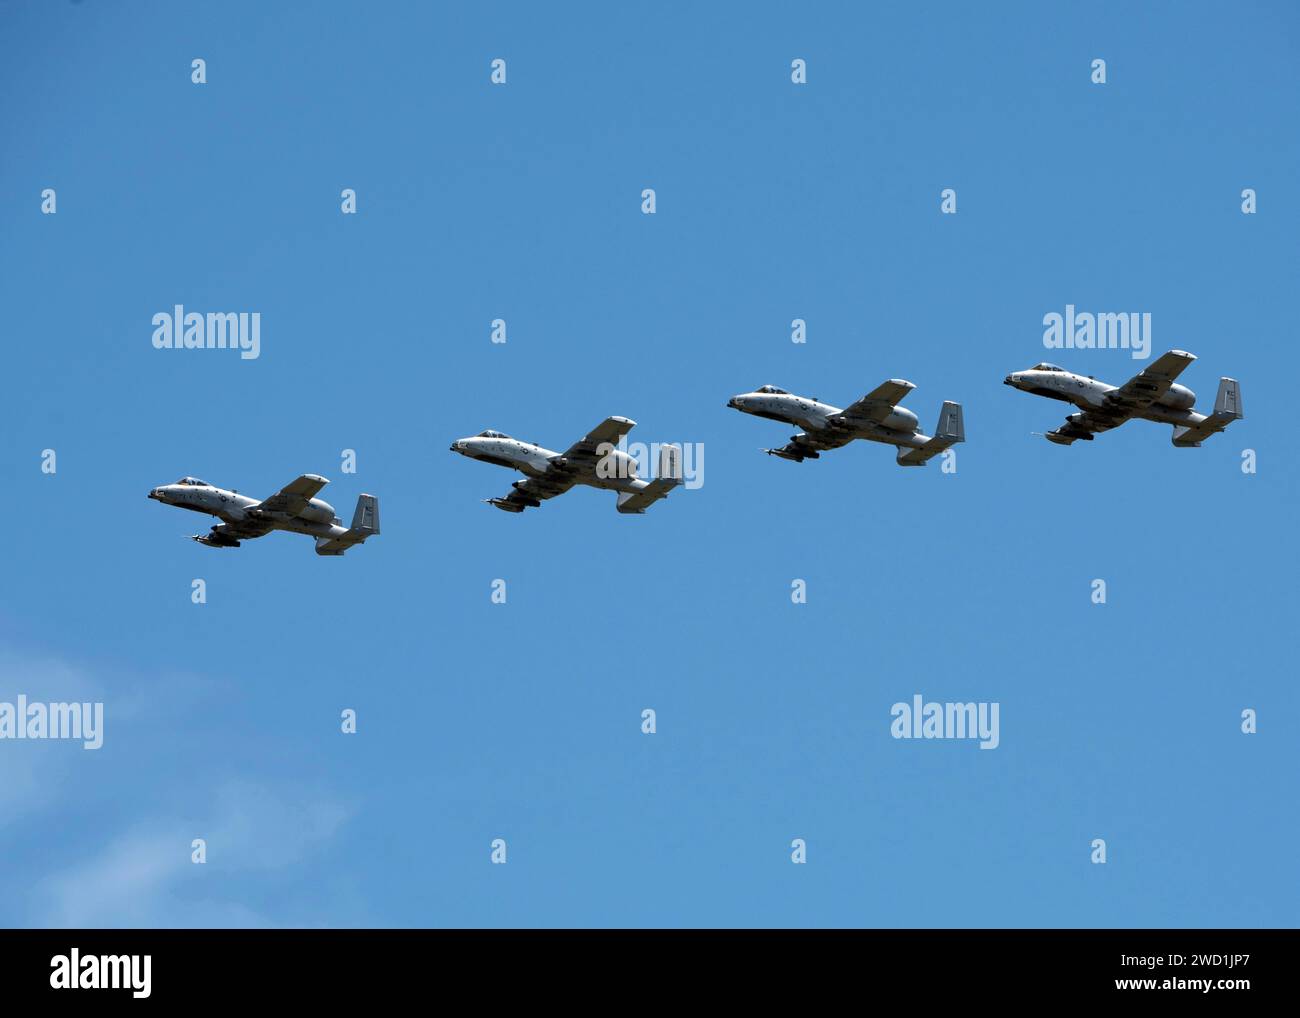 Four A-10 Thunderbolt IIs fly in formation. Stock Photo